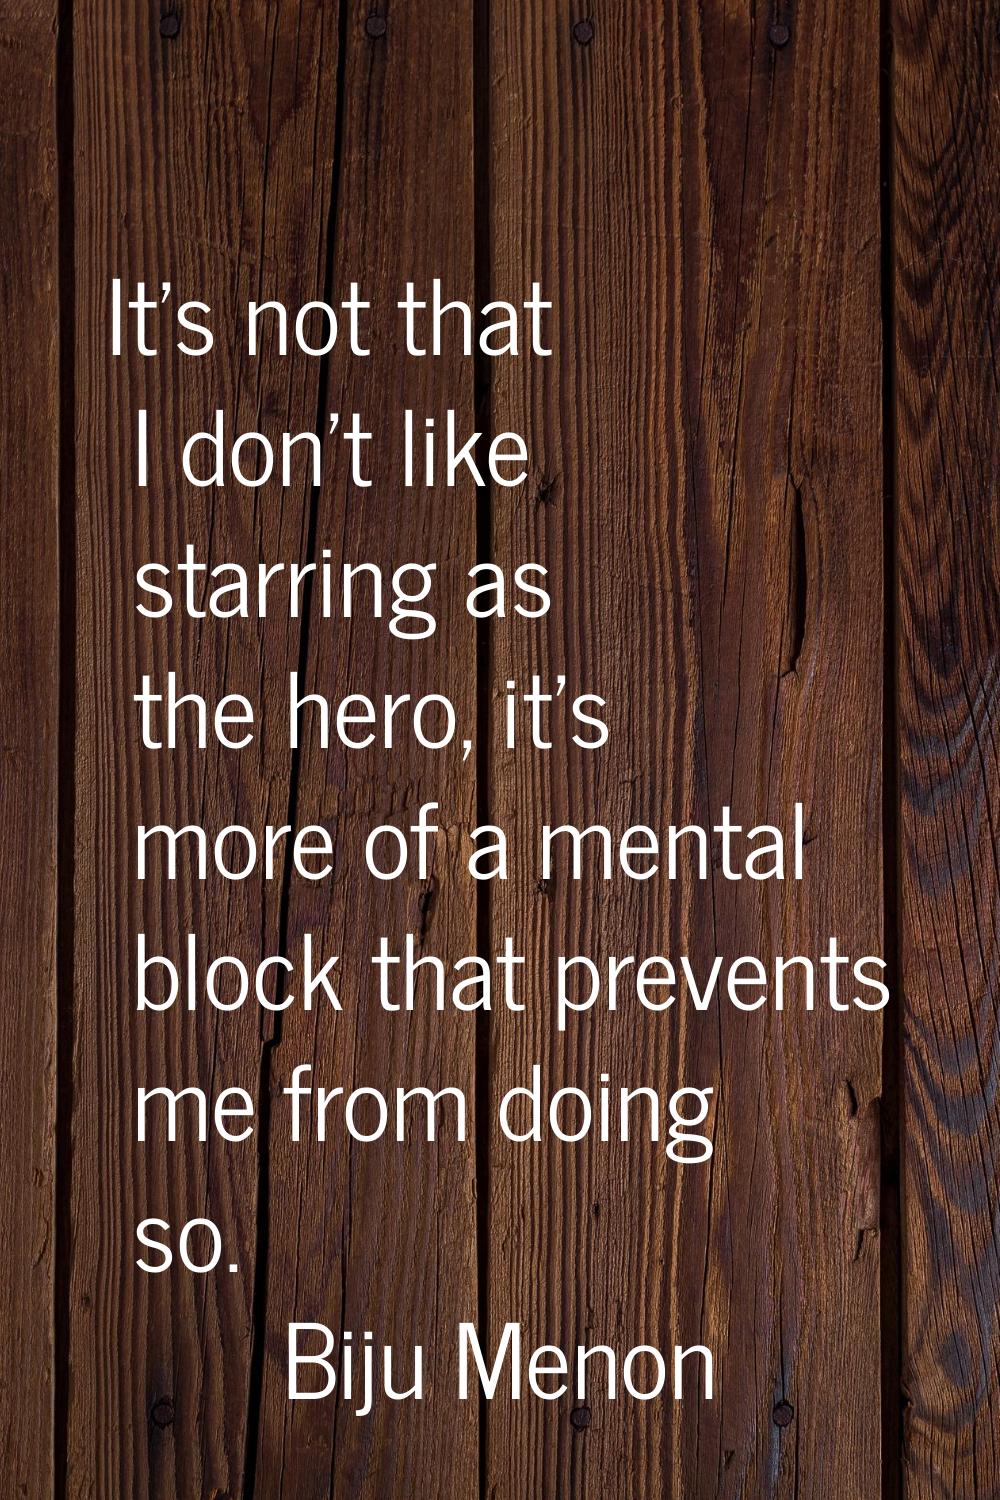 It's not that I don't like starring as the hero, it's more of a mental block that prevents me from 